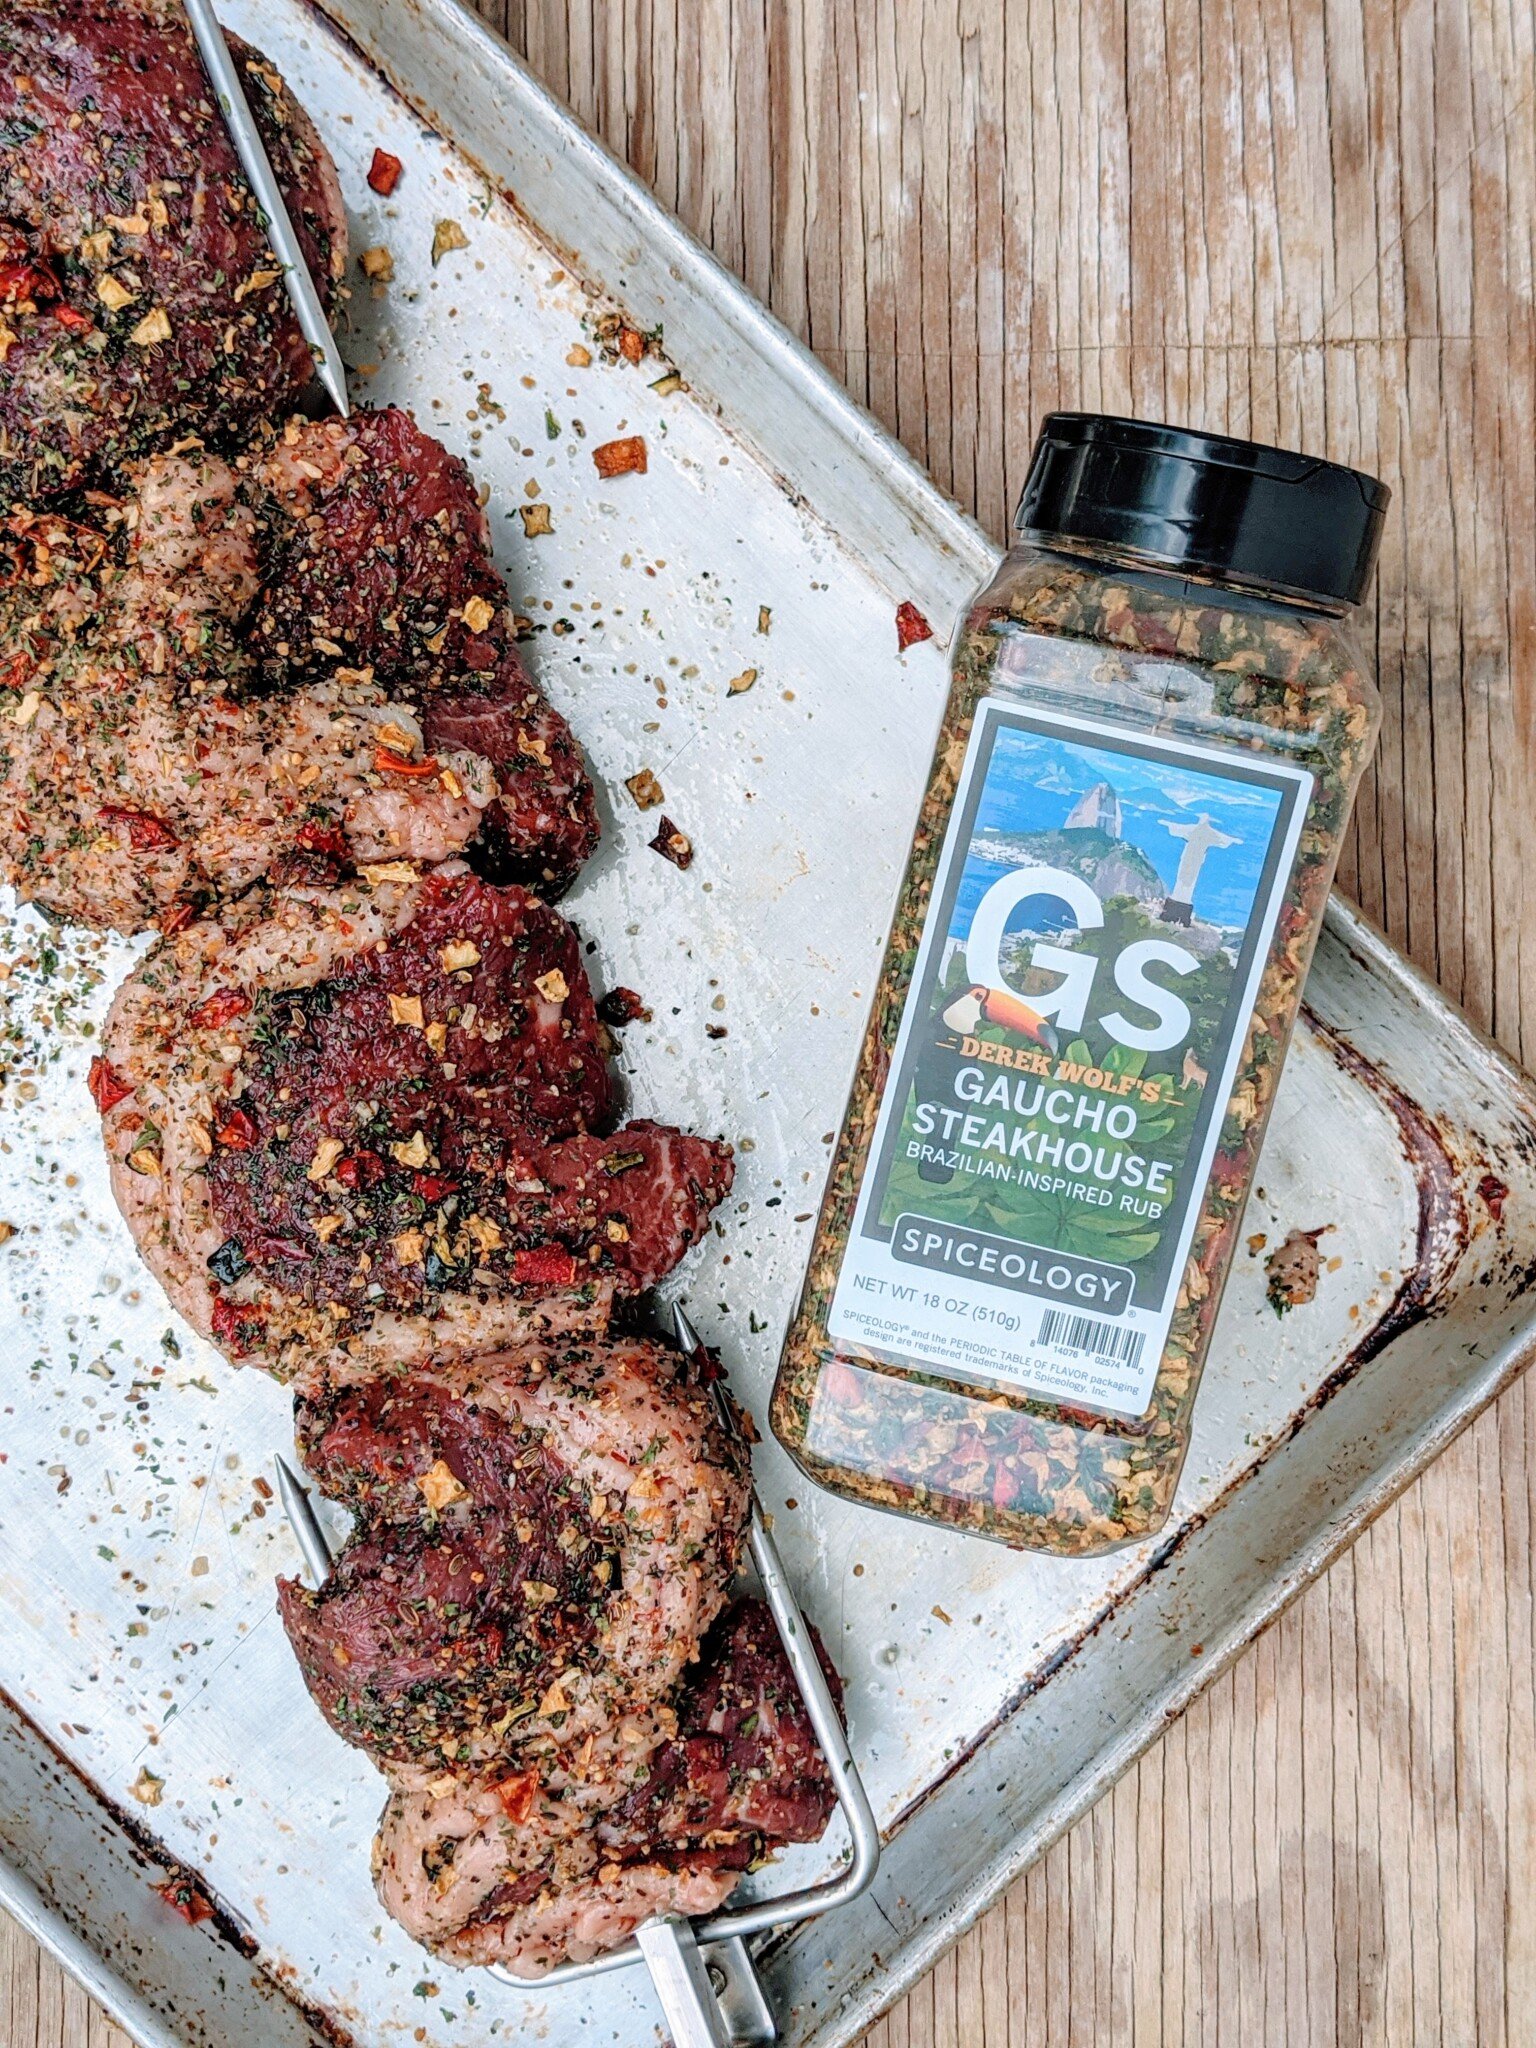 Showing the spice rub (Goucho Steakhouse by Derek Wolf) used on raw picanha. 